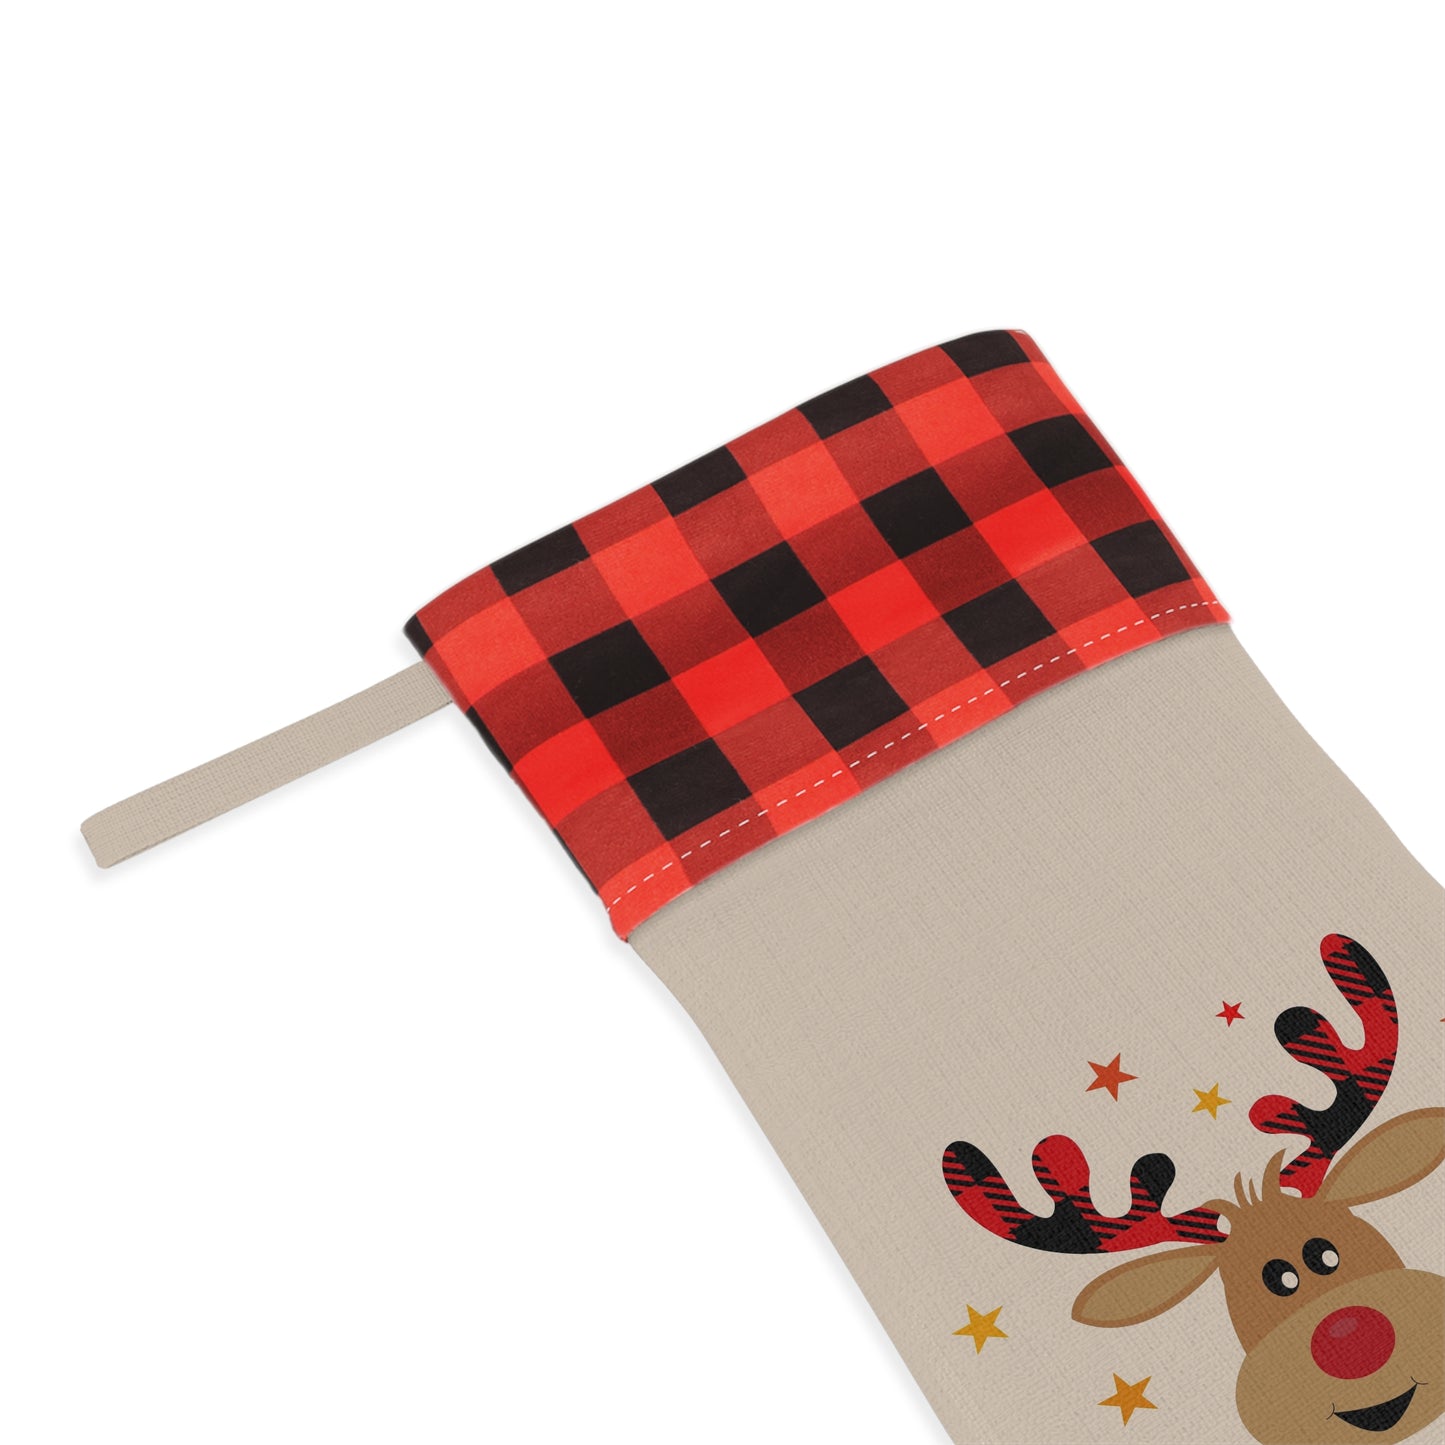 Christmas Reindeer Stocking from Printify is a festive addition to your holiday decor.